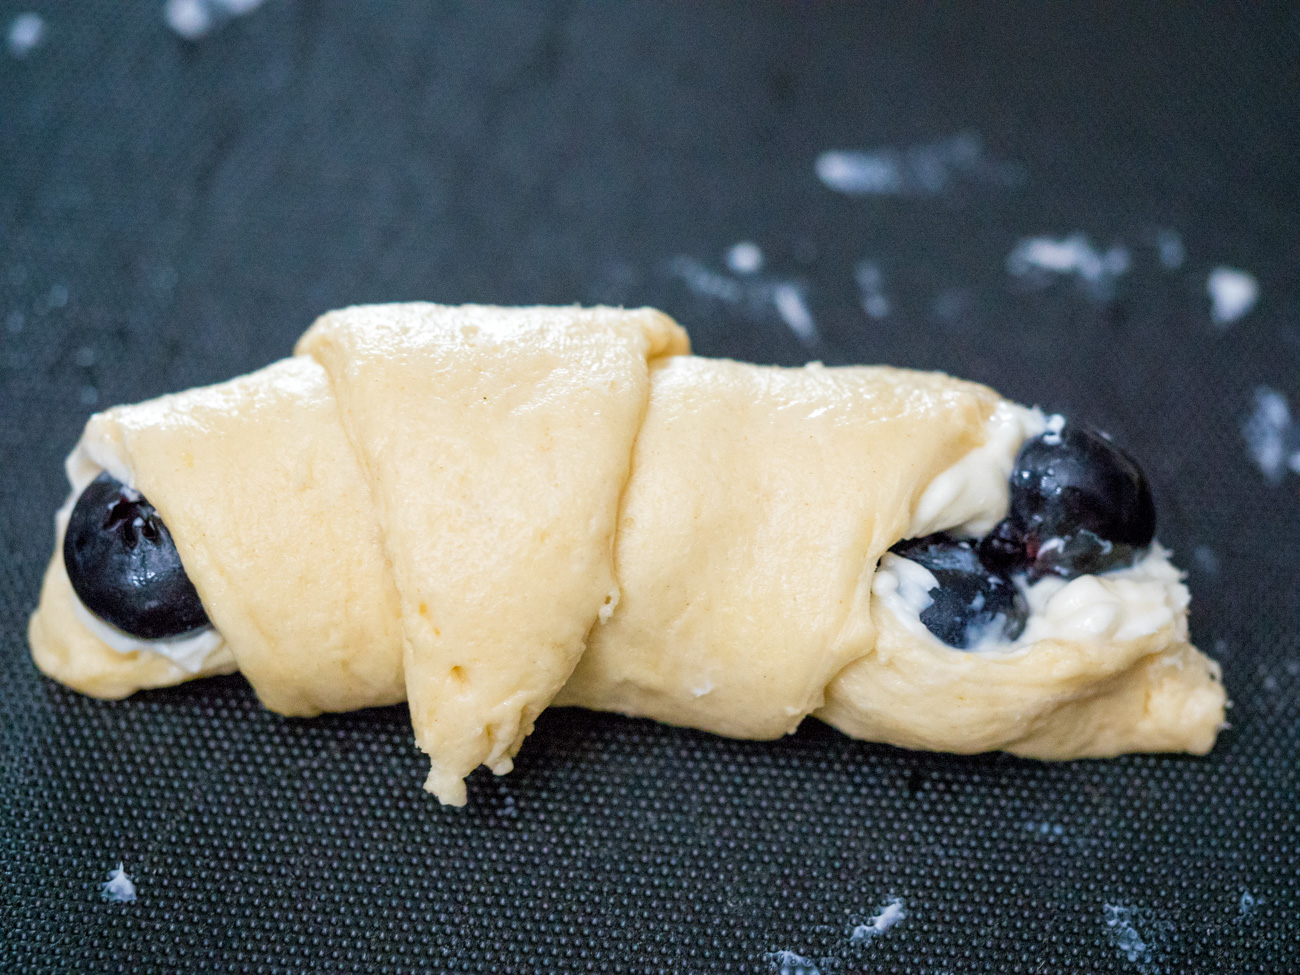 Roll the dough forward, starting with the end closest to you, all the way to the tip of the triangle.